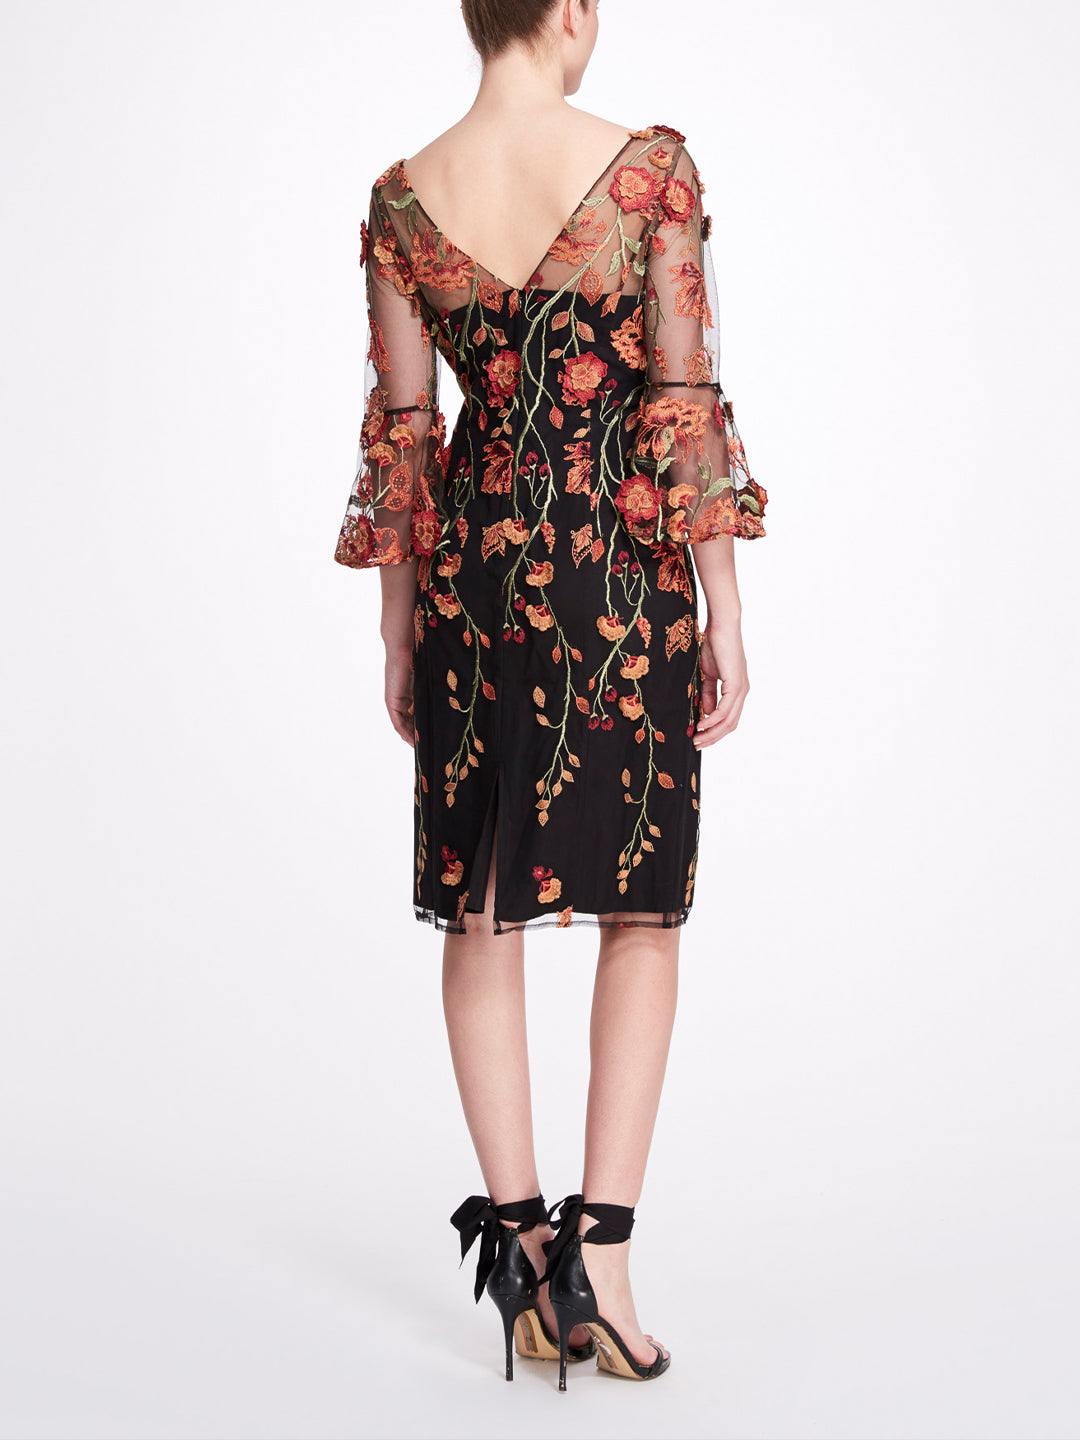 Embroidered Floral Cocktail Dress Marchesa